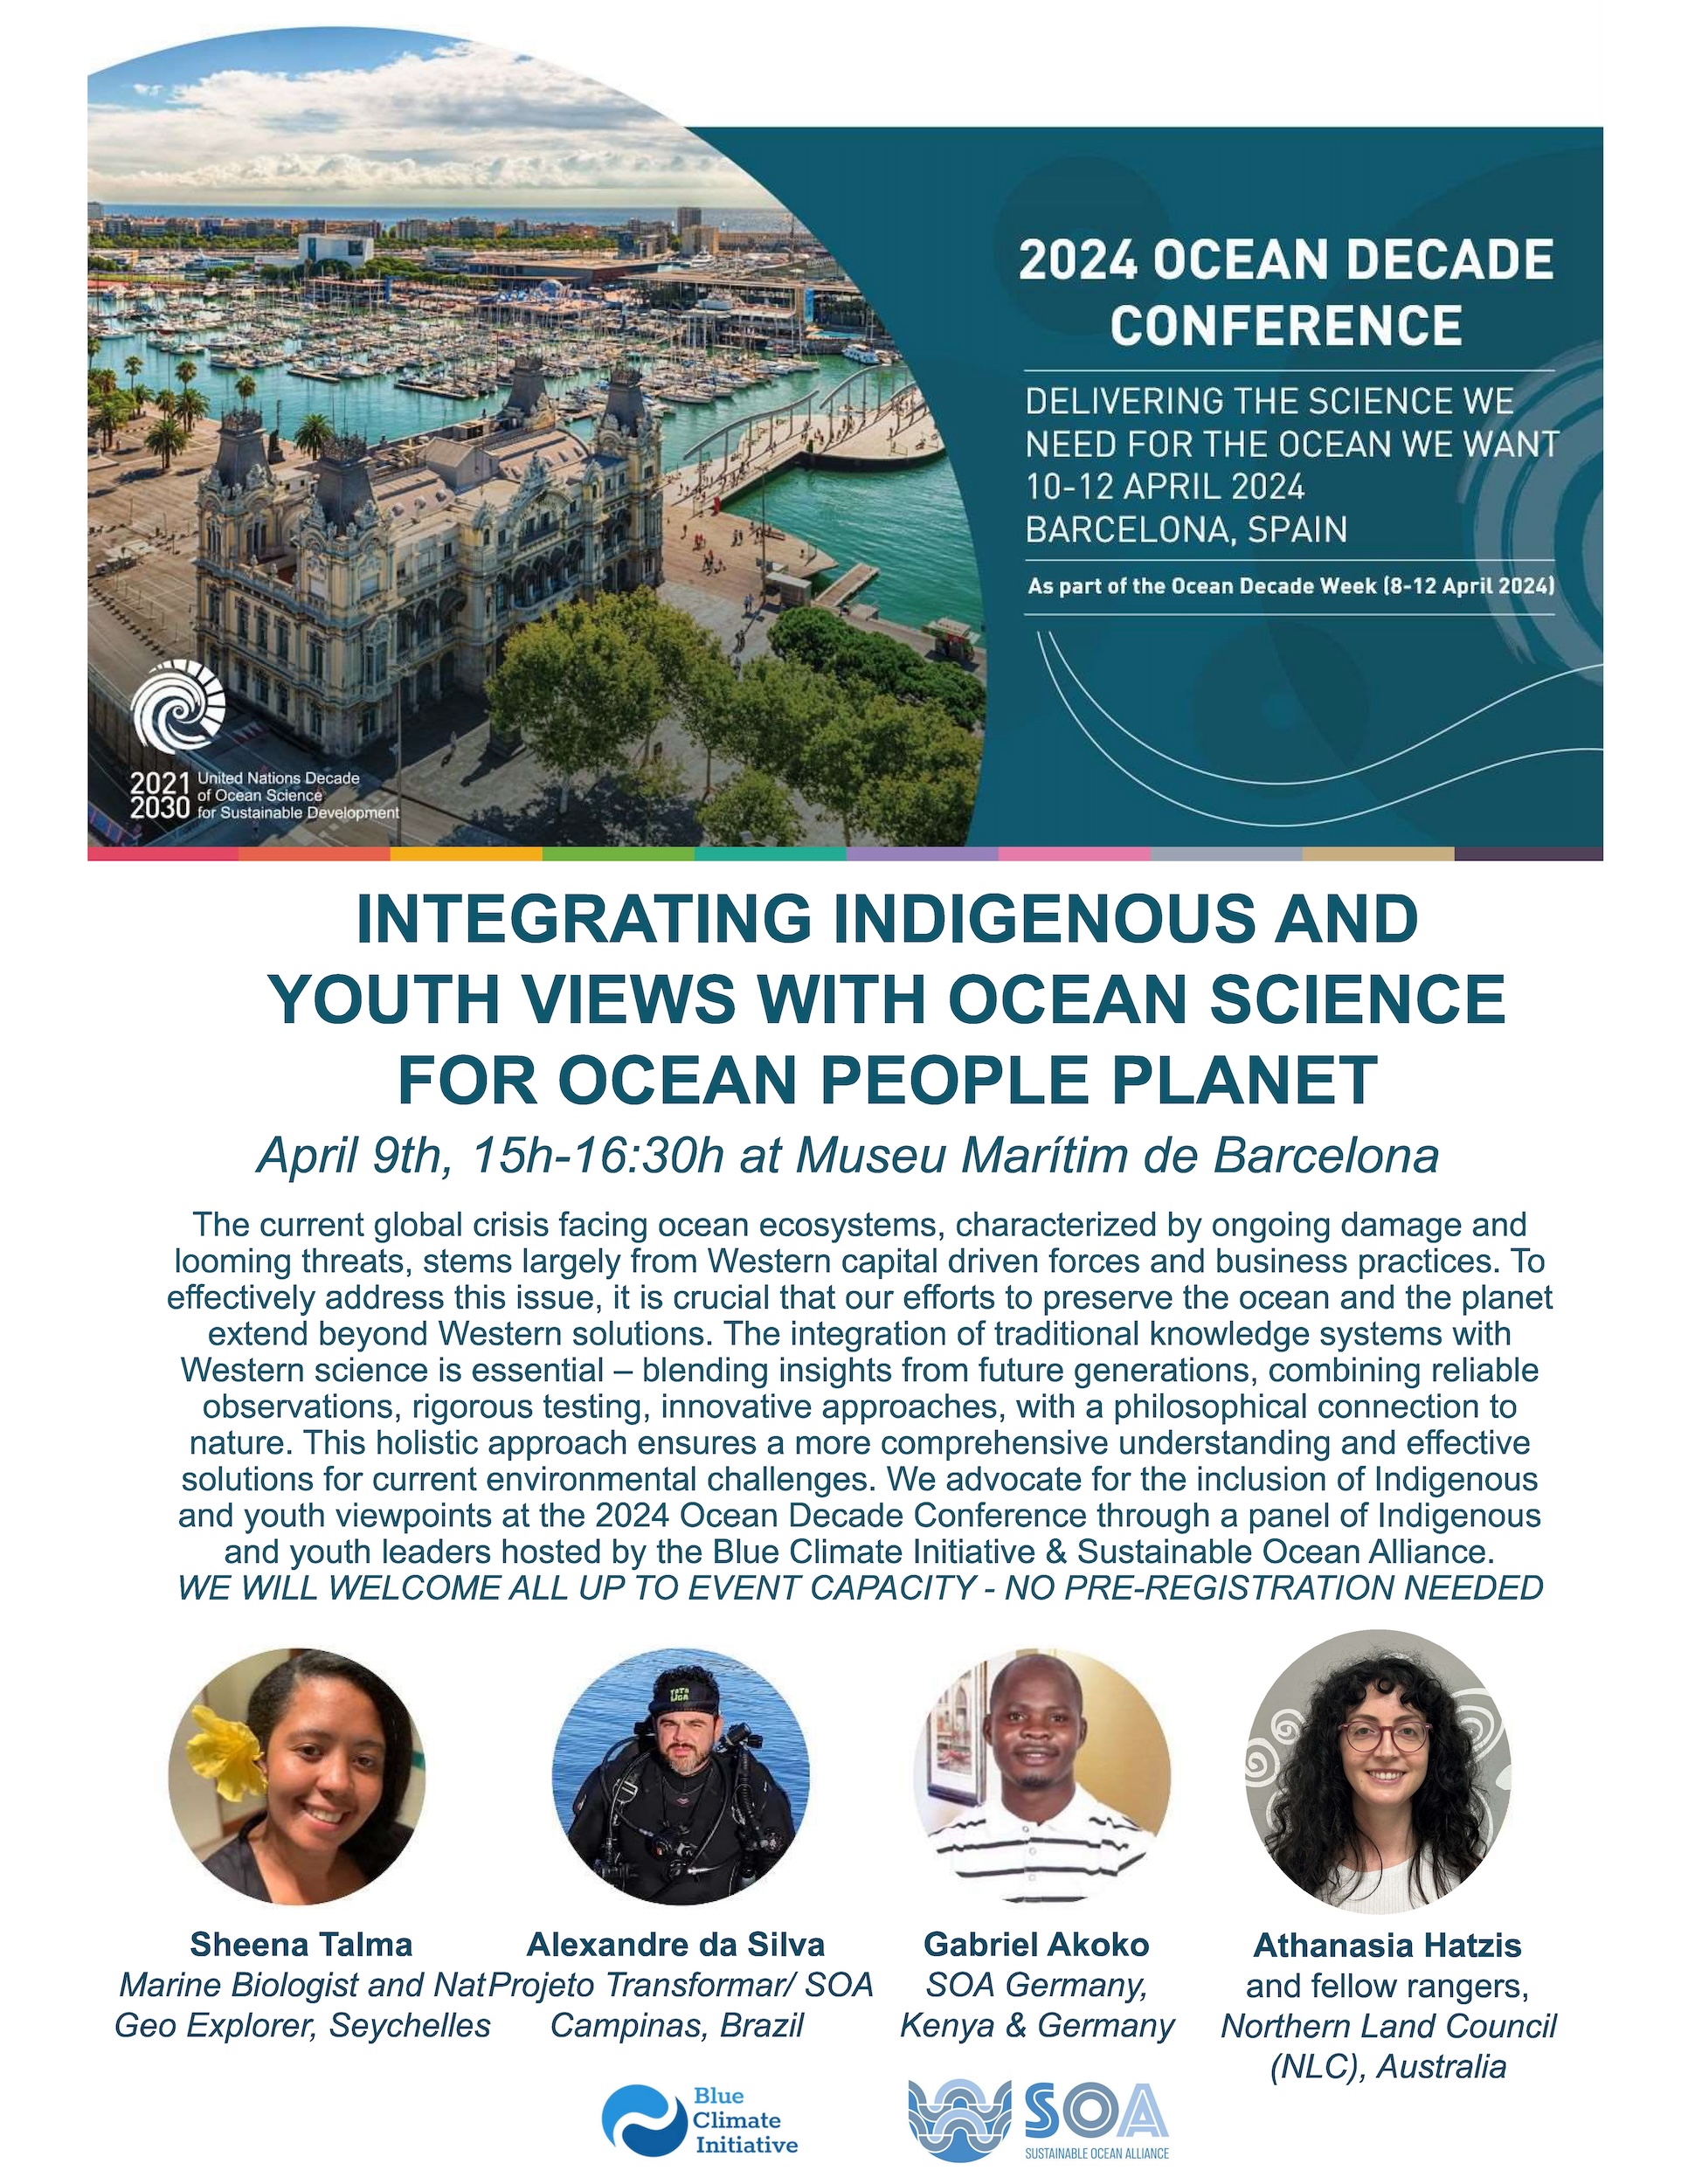 Youth and indigenoous voices at Ocean Decade Conference 2024